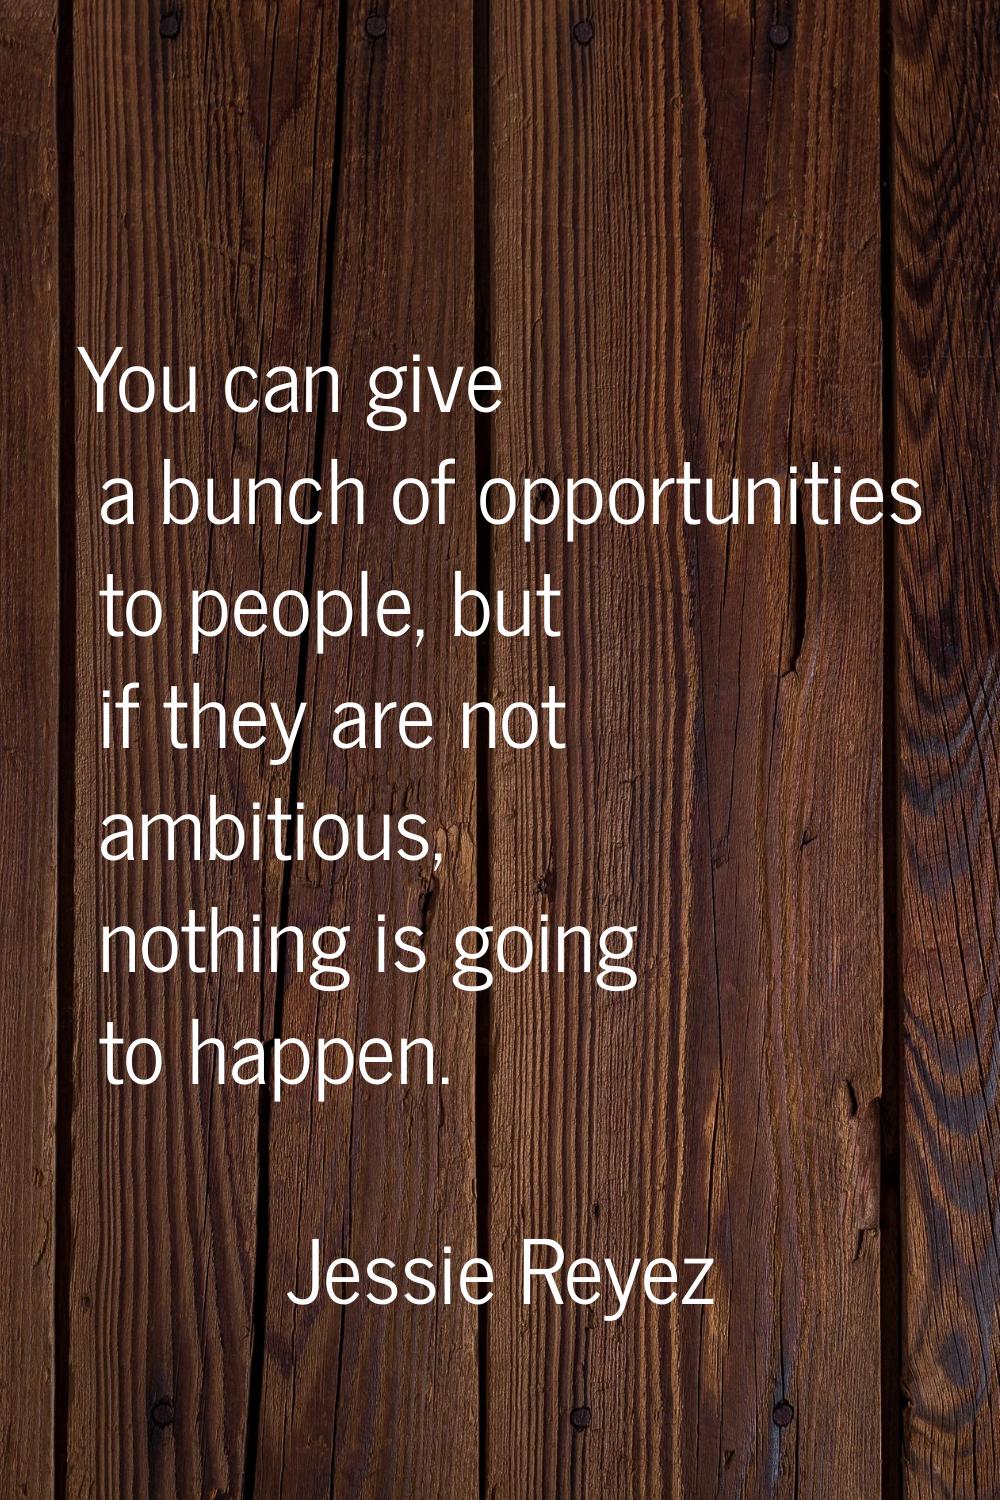 You can give a bunch of opportunities to people, but if they are not ambitious, nothing is going to